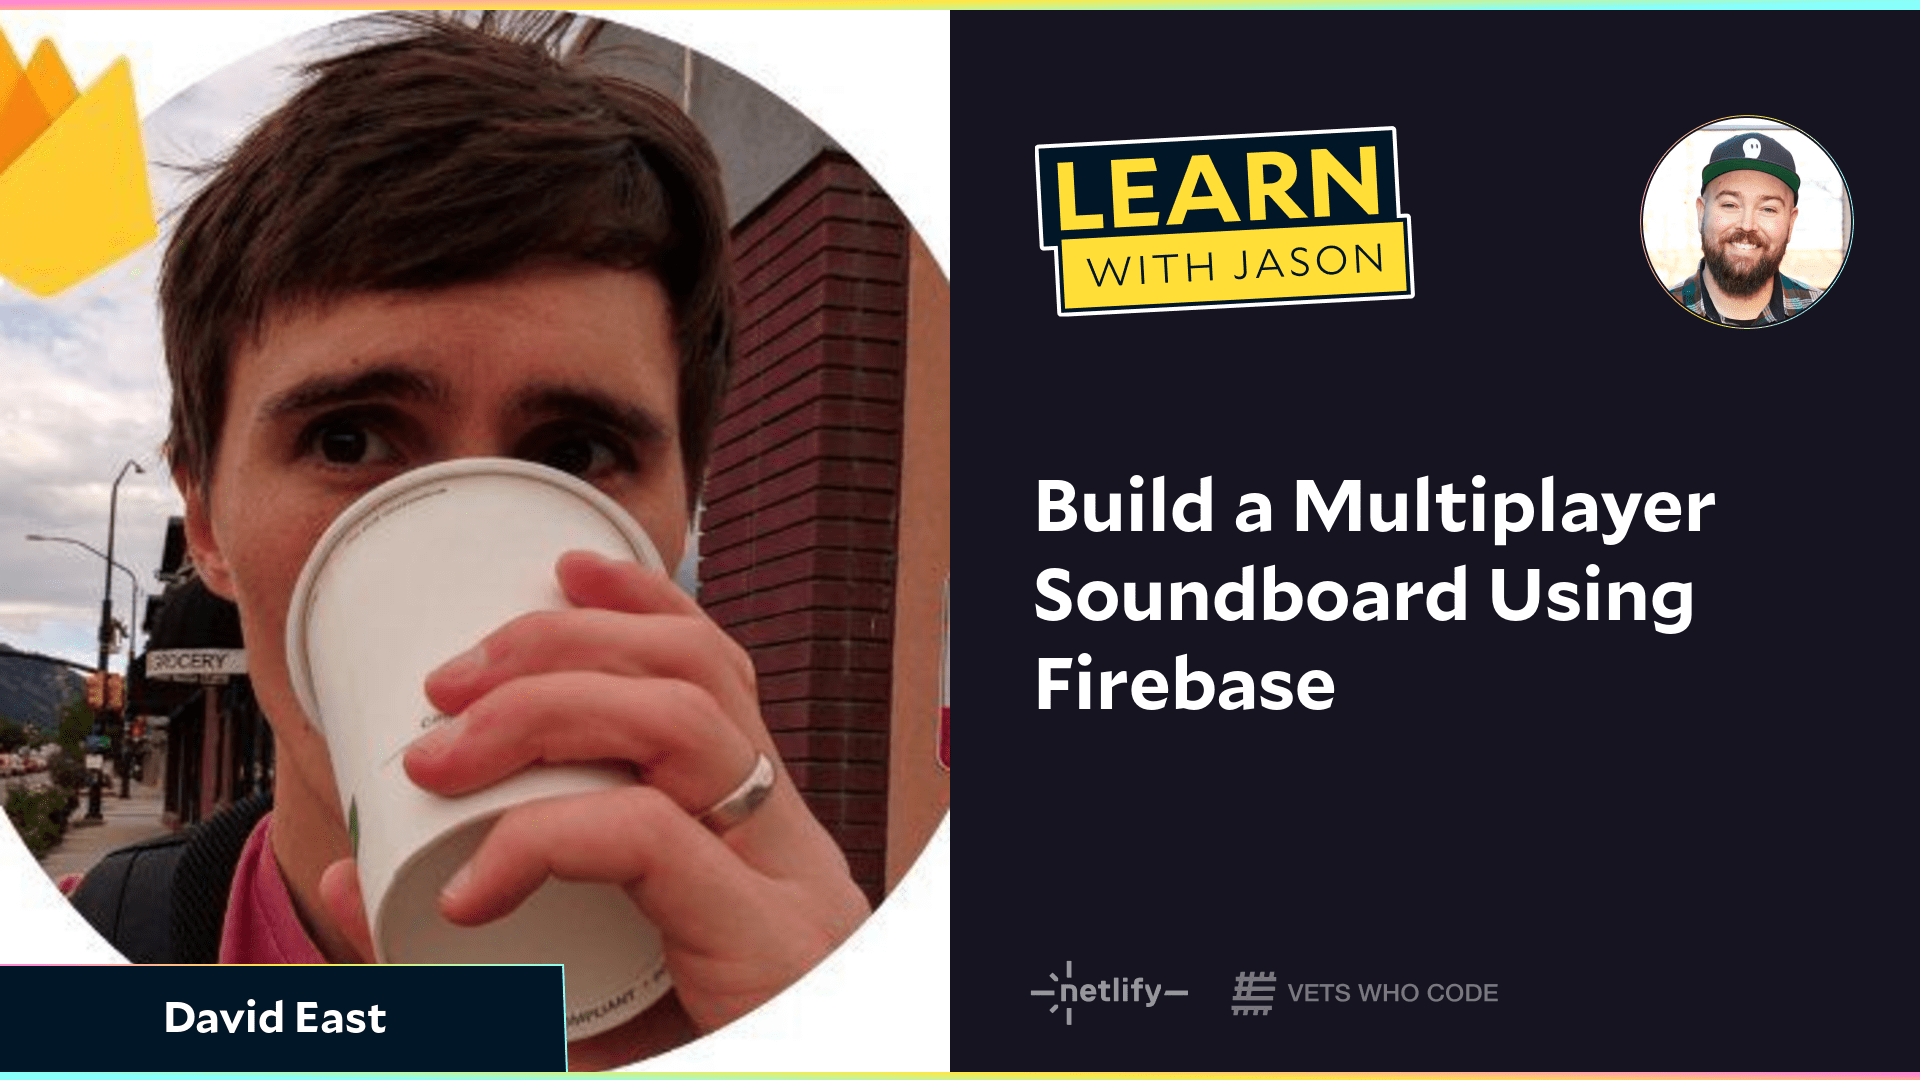 Build a Multiplayer Soundboard Using Firebase  (with David East)